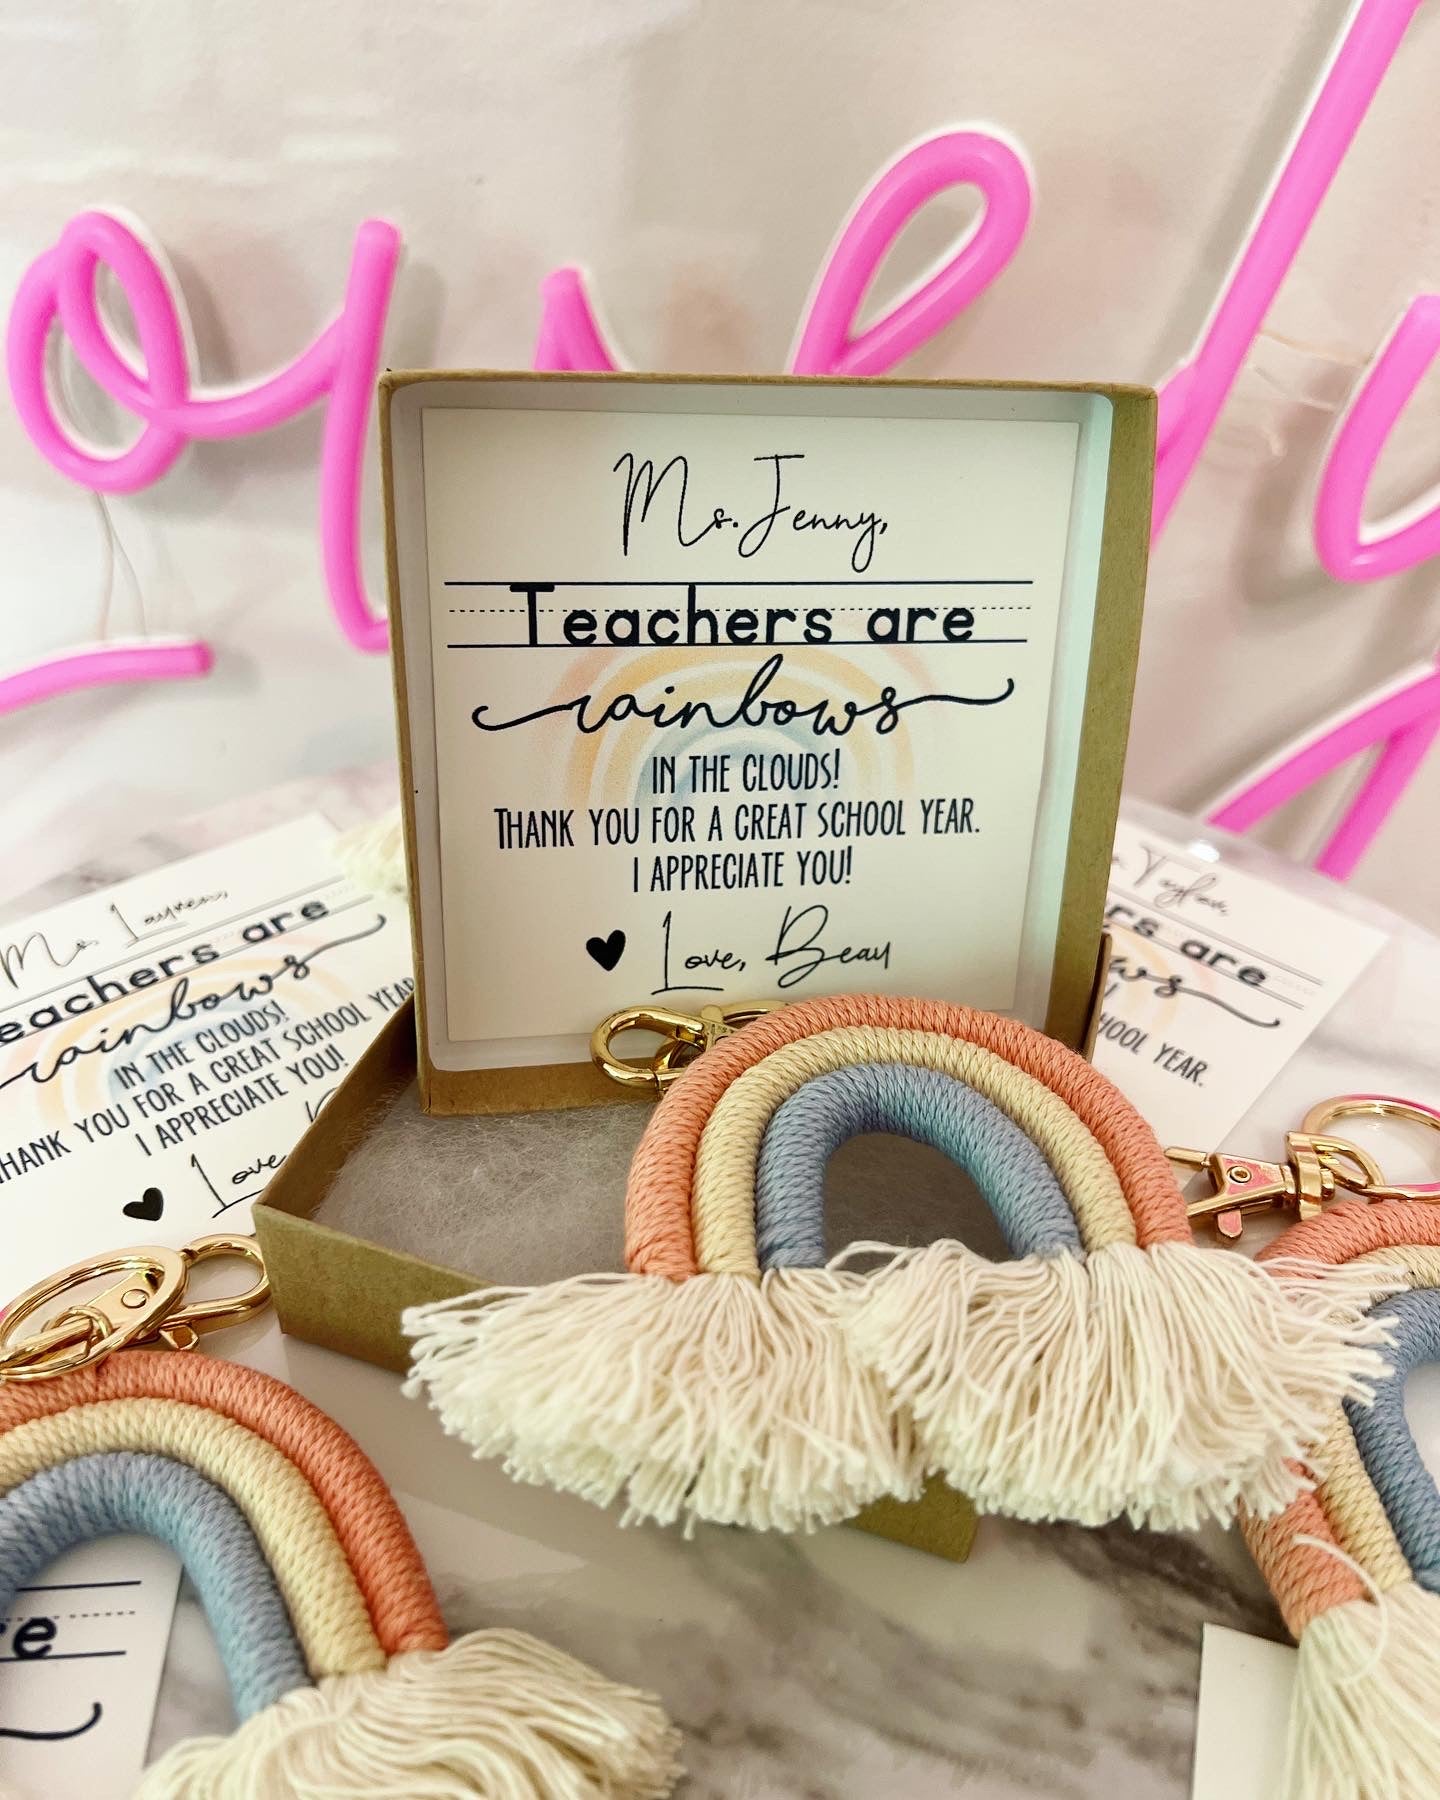 Teachers are rainbows in the clouds thank you gift